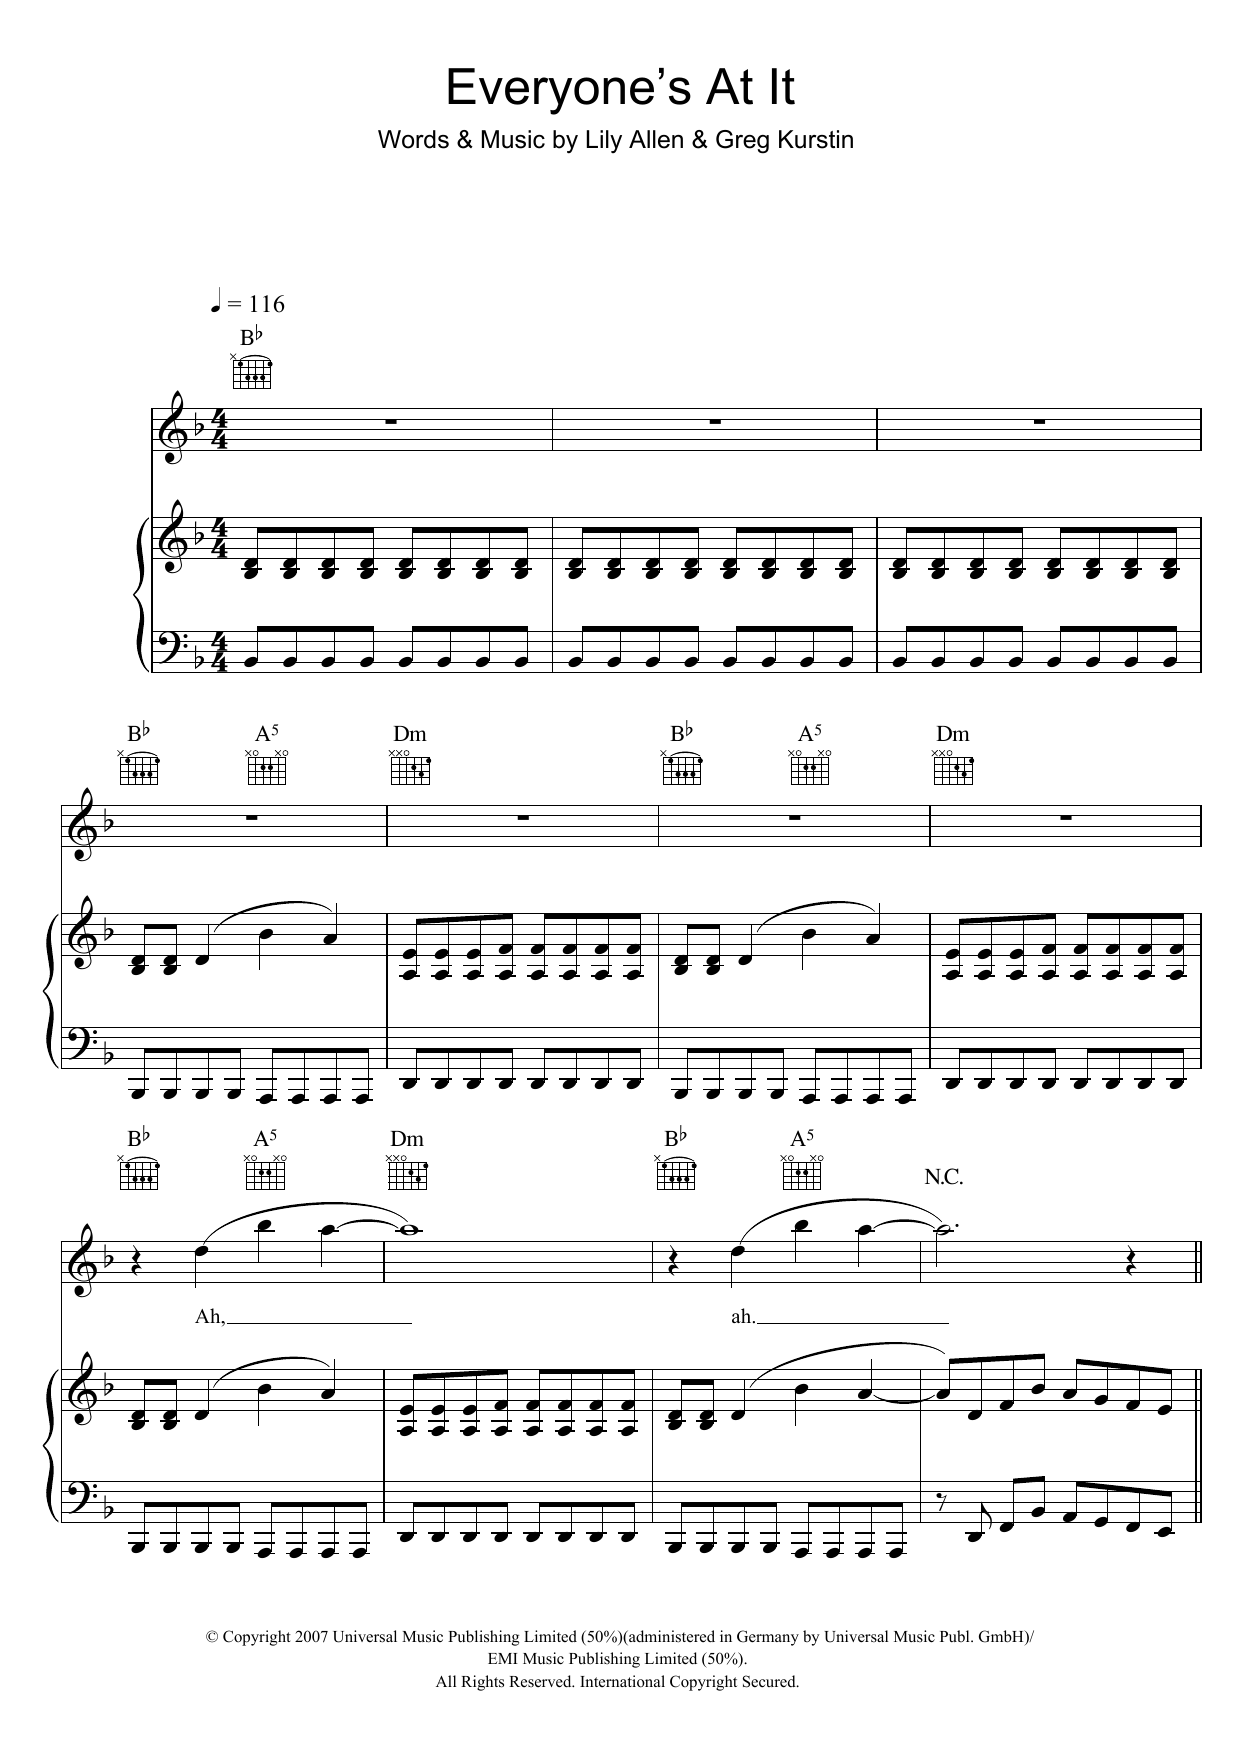 Download Lily Allen Everyone's At It Sheet Music